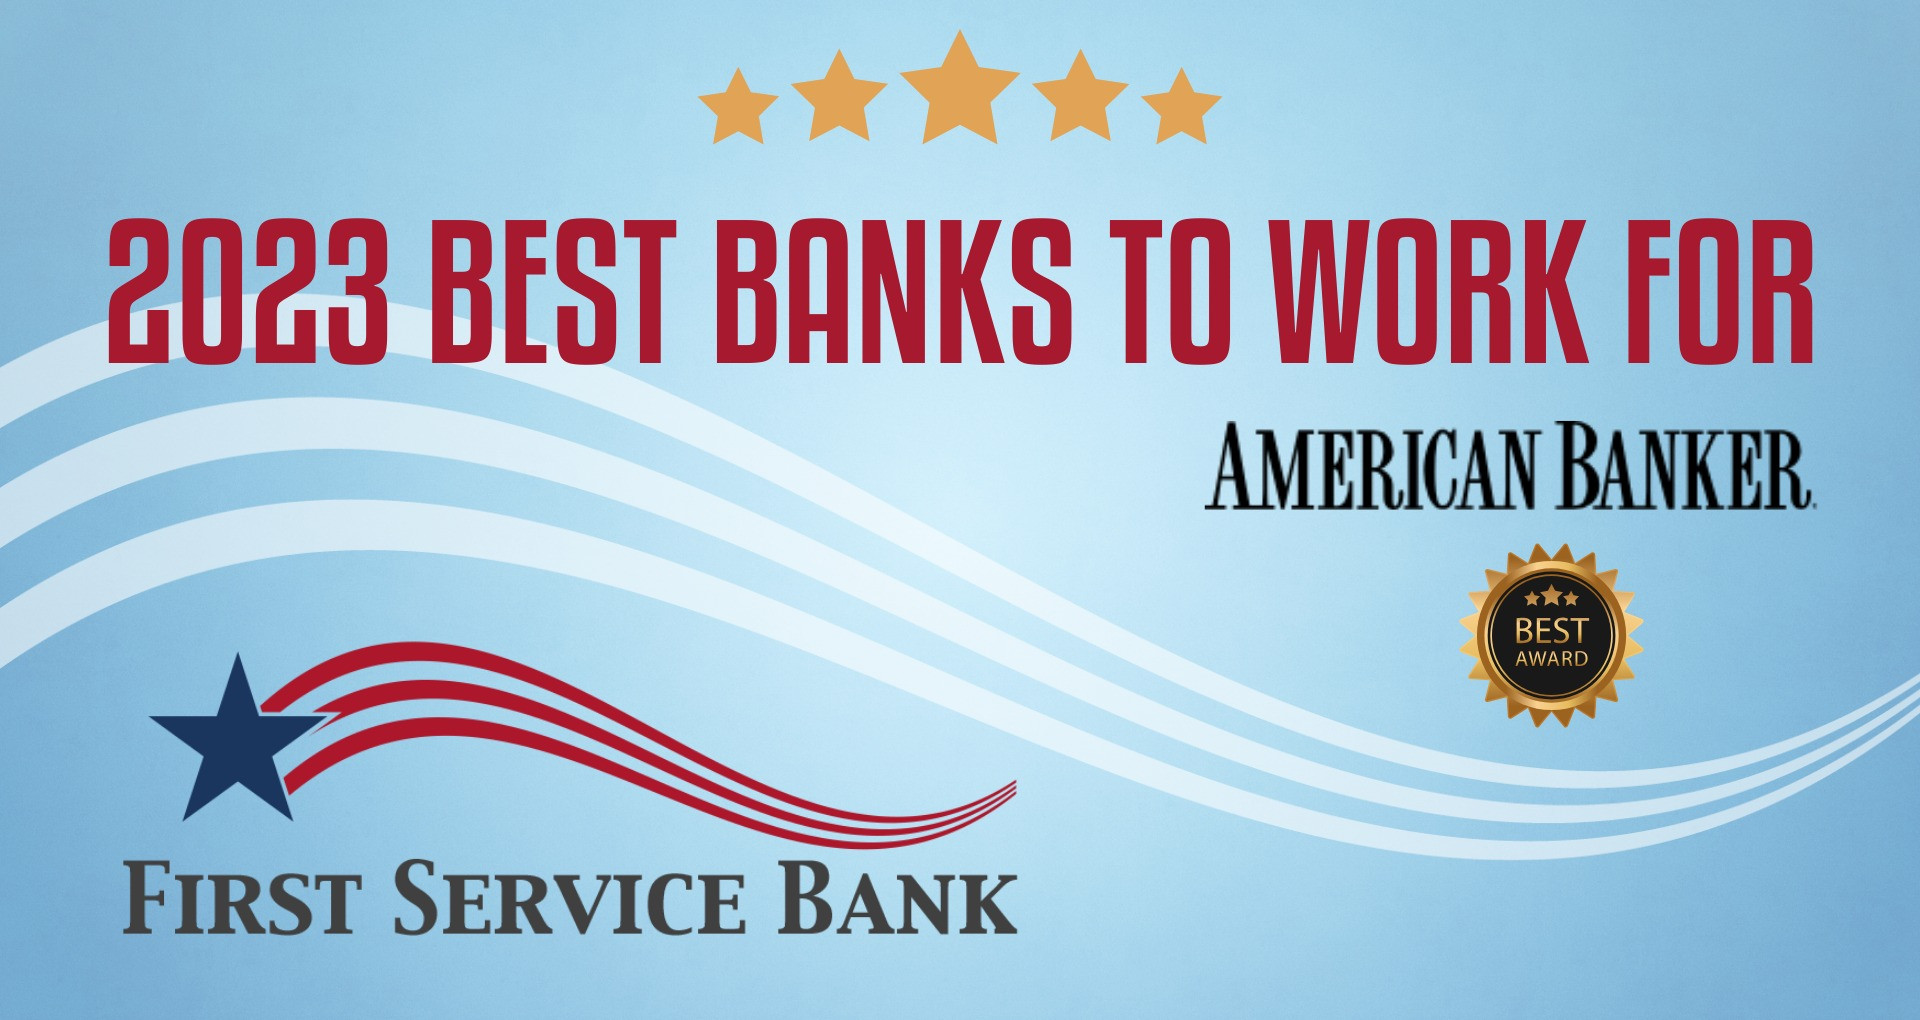 First Service named ‘best bank’